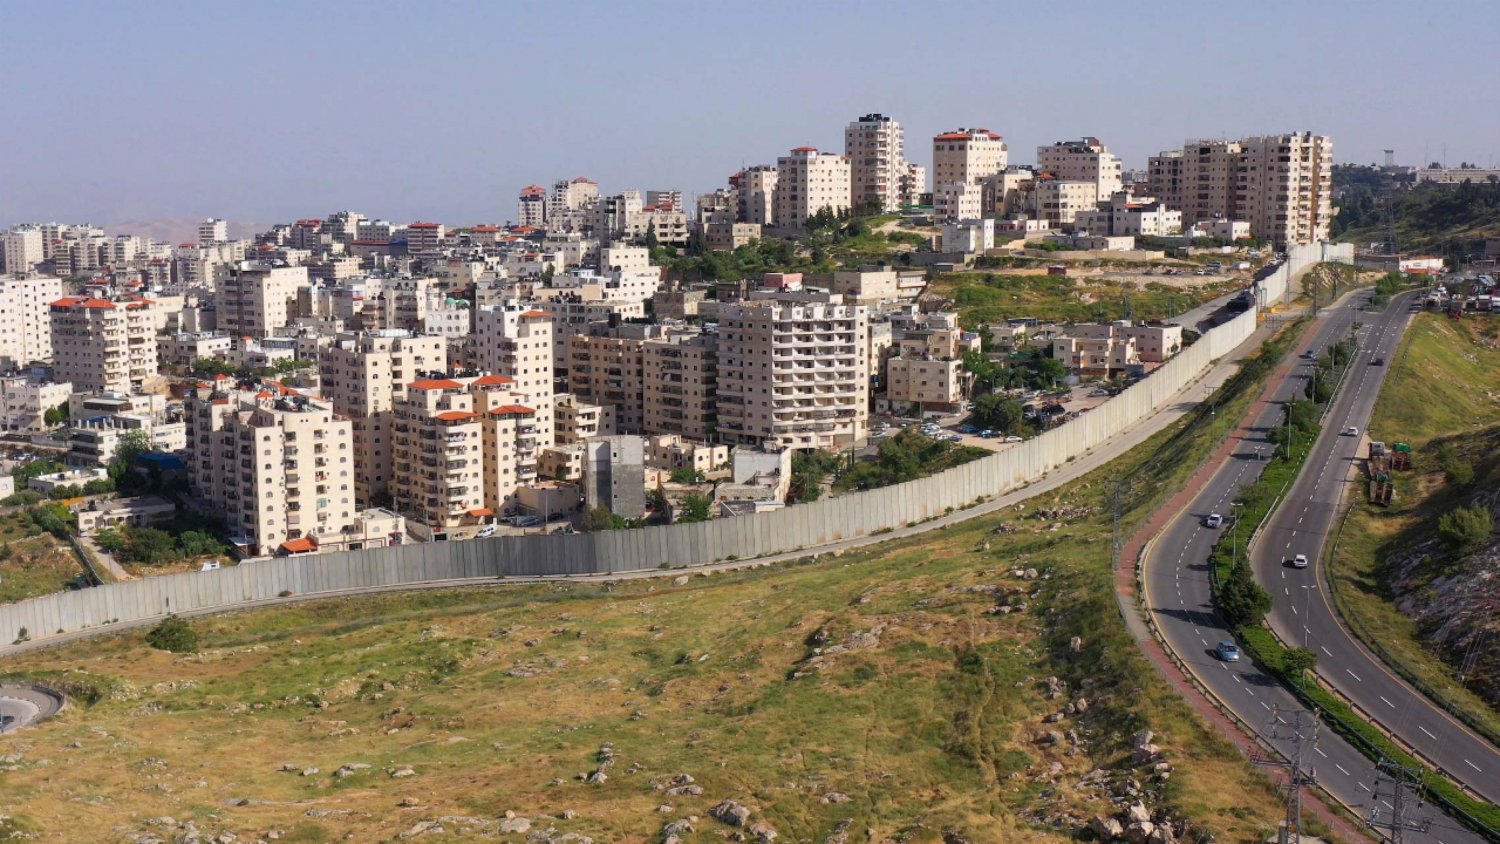 Shu'fat refugee camp and the Israeli settlement of Pisgat Ze'ev, divided by the Separation Wall